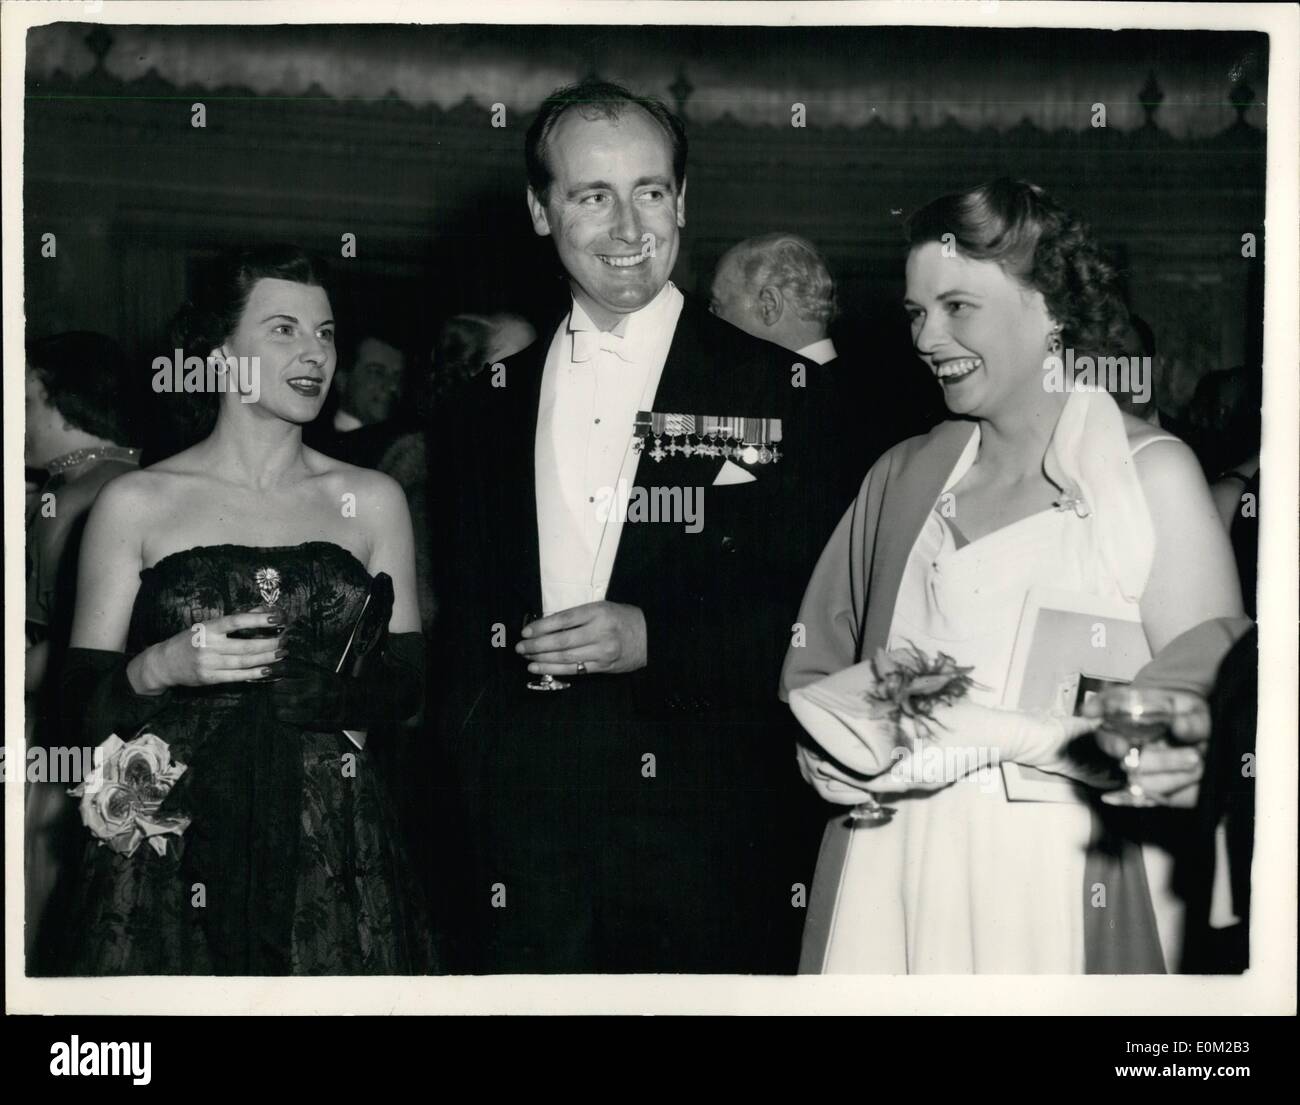 Apr. 04, 1953 - AVIATION JUBILEE BALL AT THE DORCHESTER HOTEL.... NEVILLE DUKE ATTENDS.... An Aviation Jubilee Ball in aid of the Air League of the British Empire was held last night at the Dorchester Hotel.... Many well known personalities were present... Keystone Photo Shows:- Left to Right:- Mrs. Neville Duke, Neville Duke, the well known test pilot, and Mrs. Beaumont pictured at the Ball last night. Stock Photo